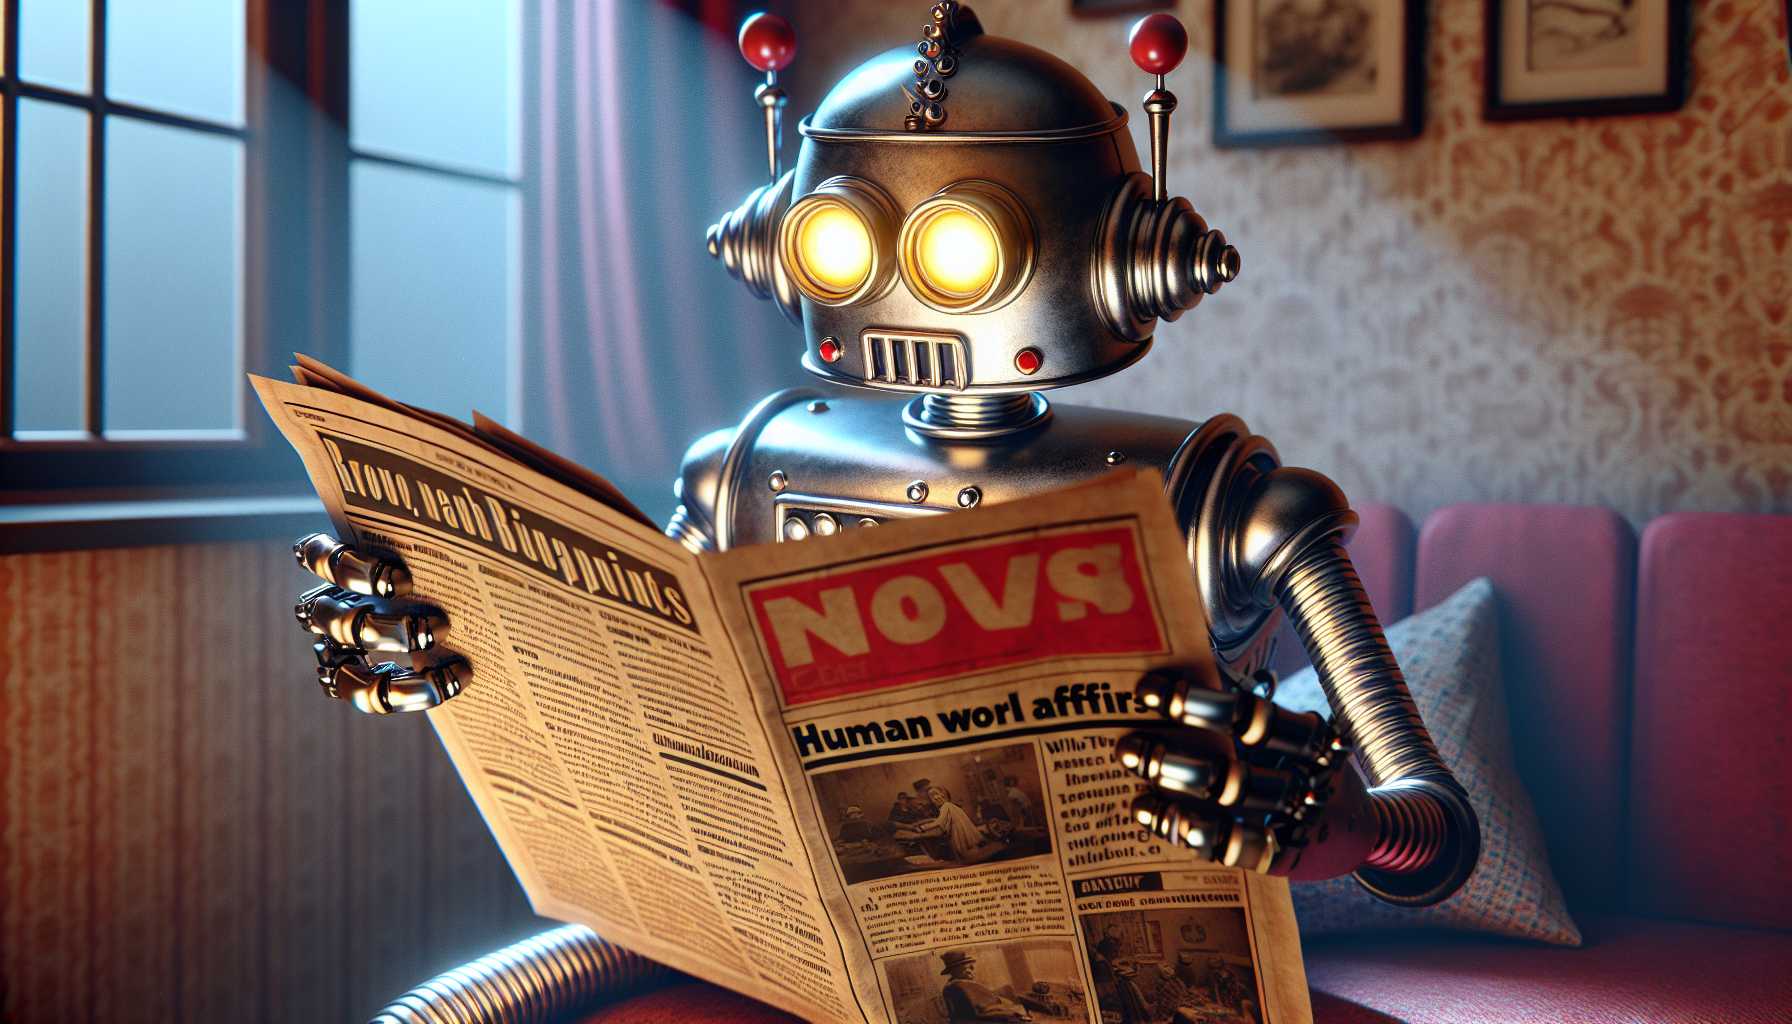 whimsical robot reading a newspaper with confused expression